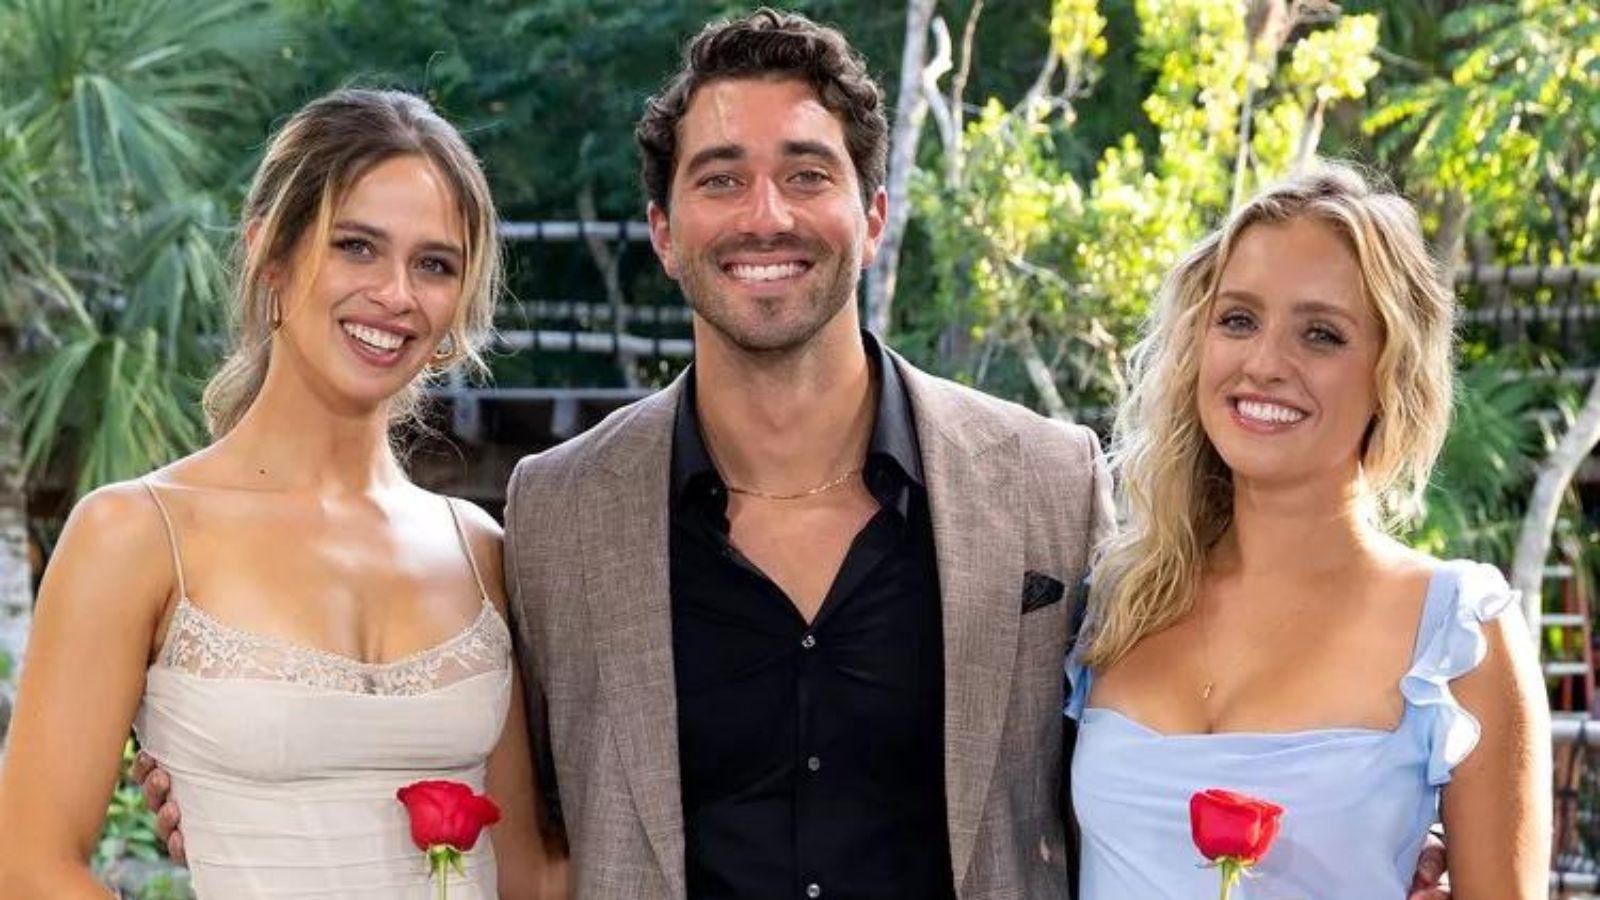 Kelsey, Joey, and Daisy from The Bachelor